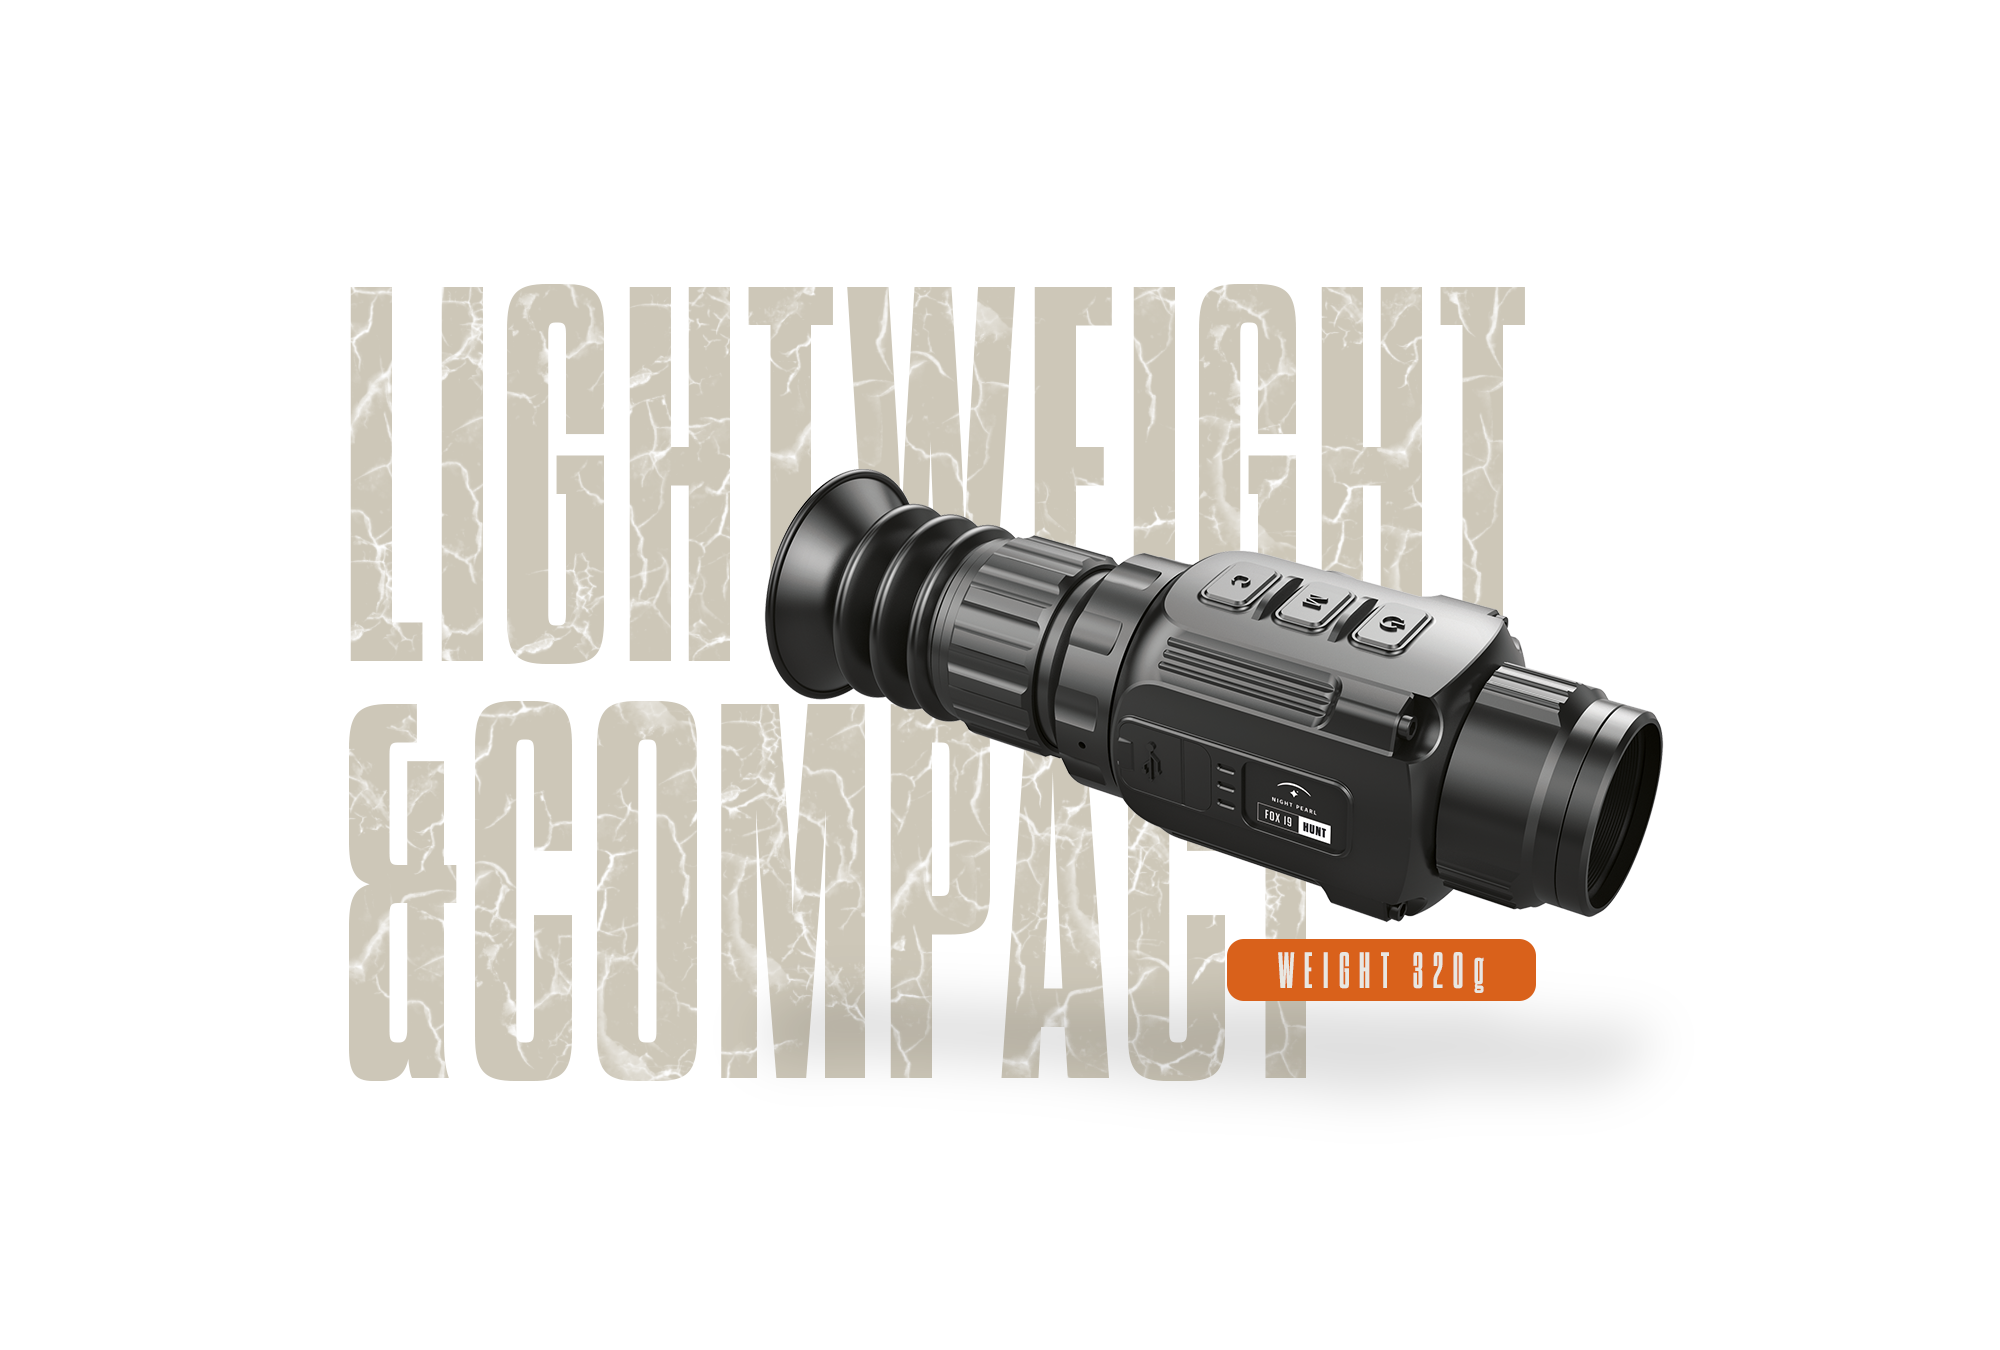 LIGHTWEIGHT AND COMPACT